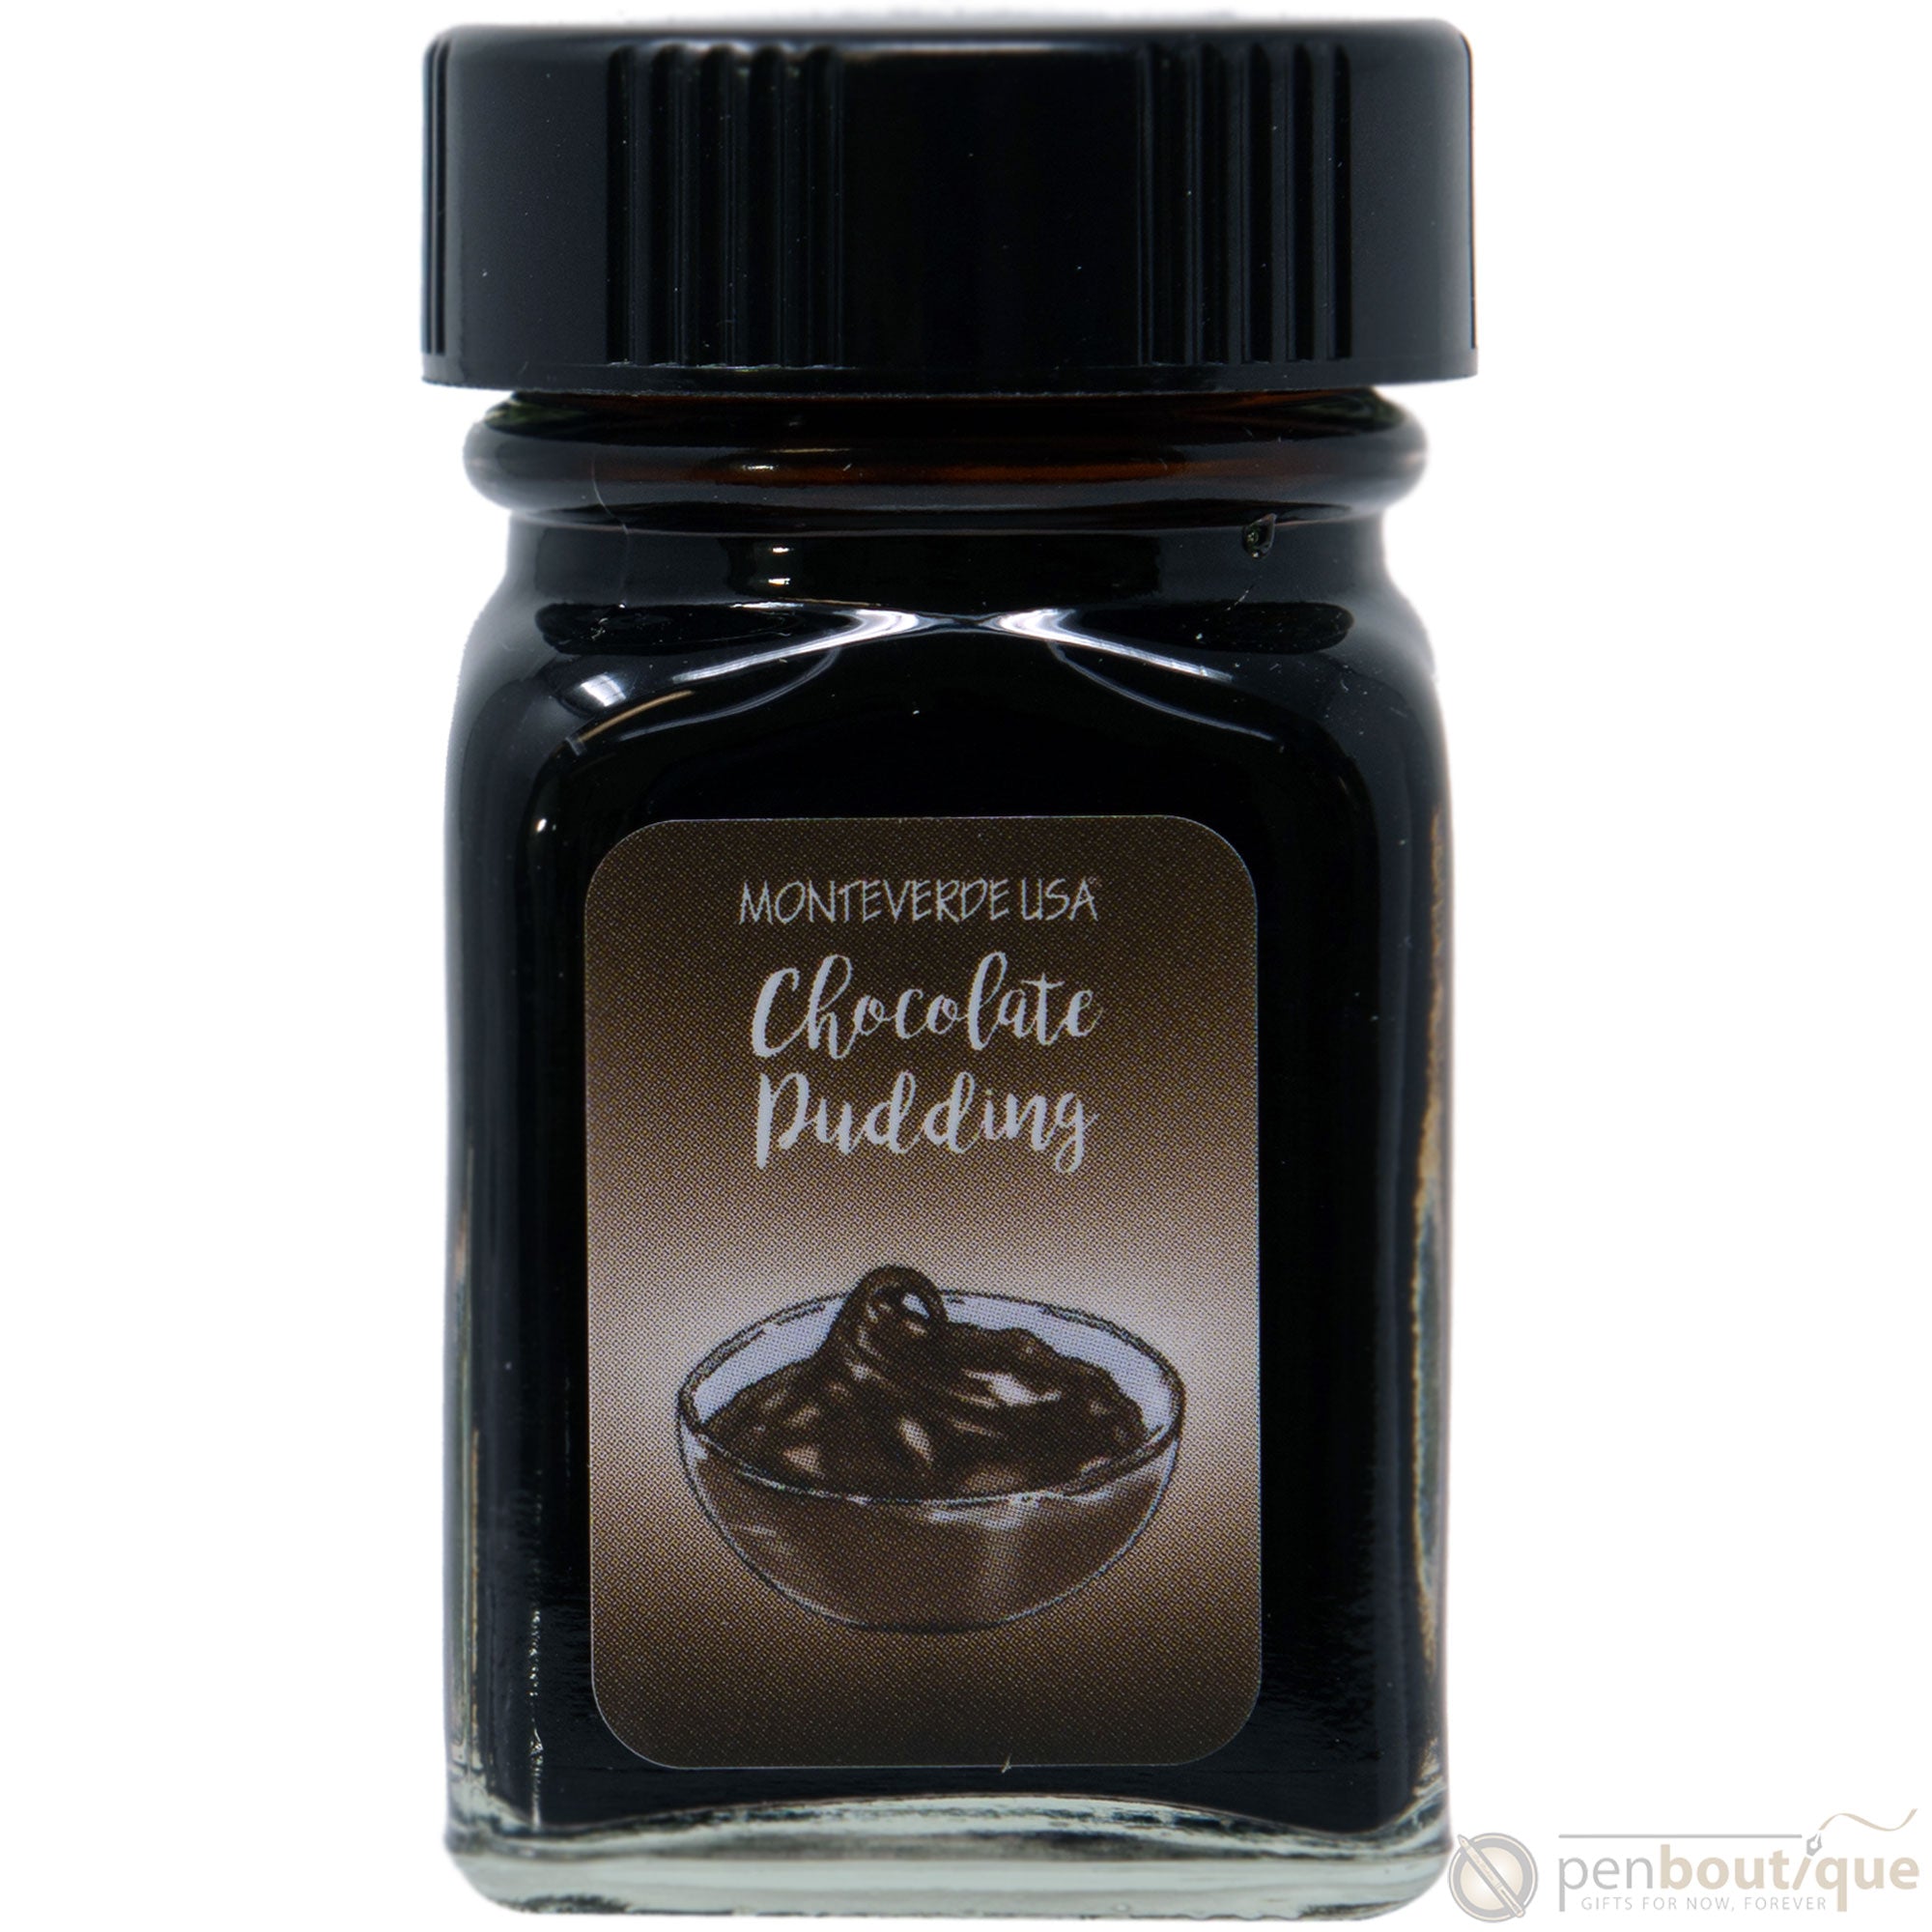 Monteverde Scotch Brown Ink – The Indian Marmalade Company